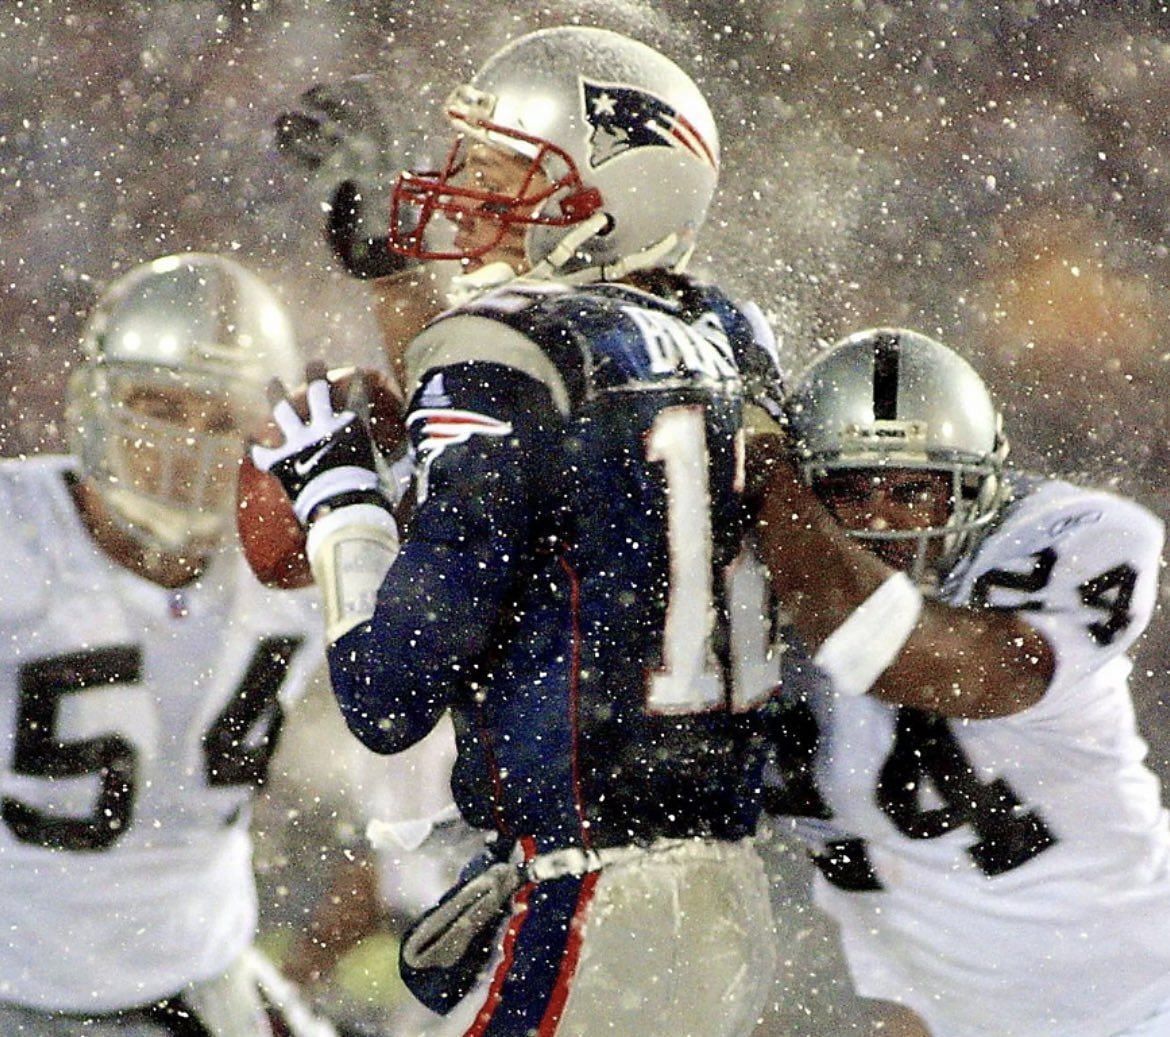 Woodson sakcs Brady in the Tuck Rule game. Photo via JT The Brick Twitter